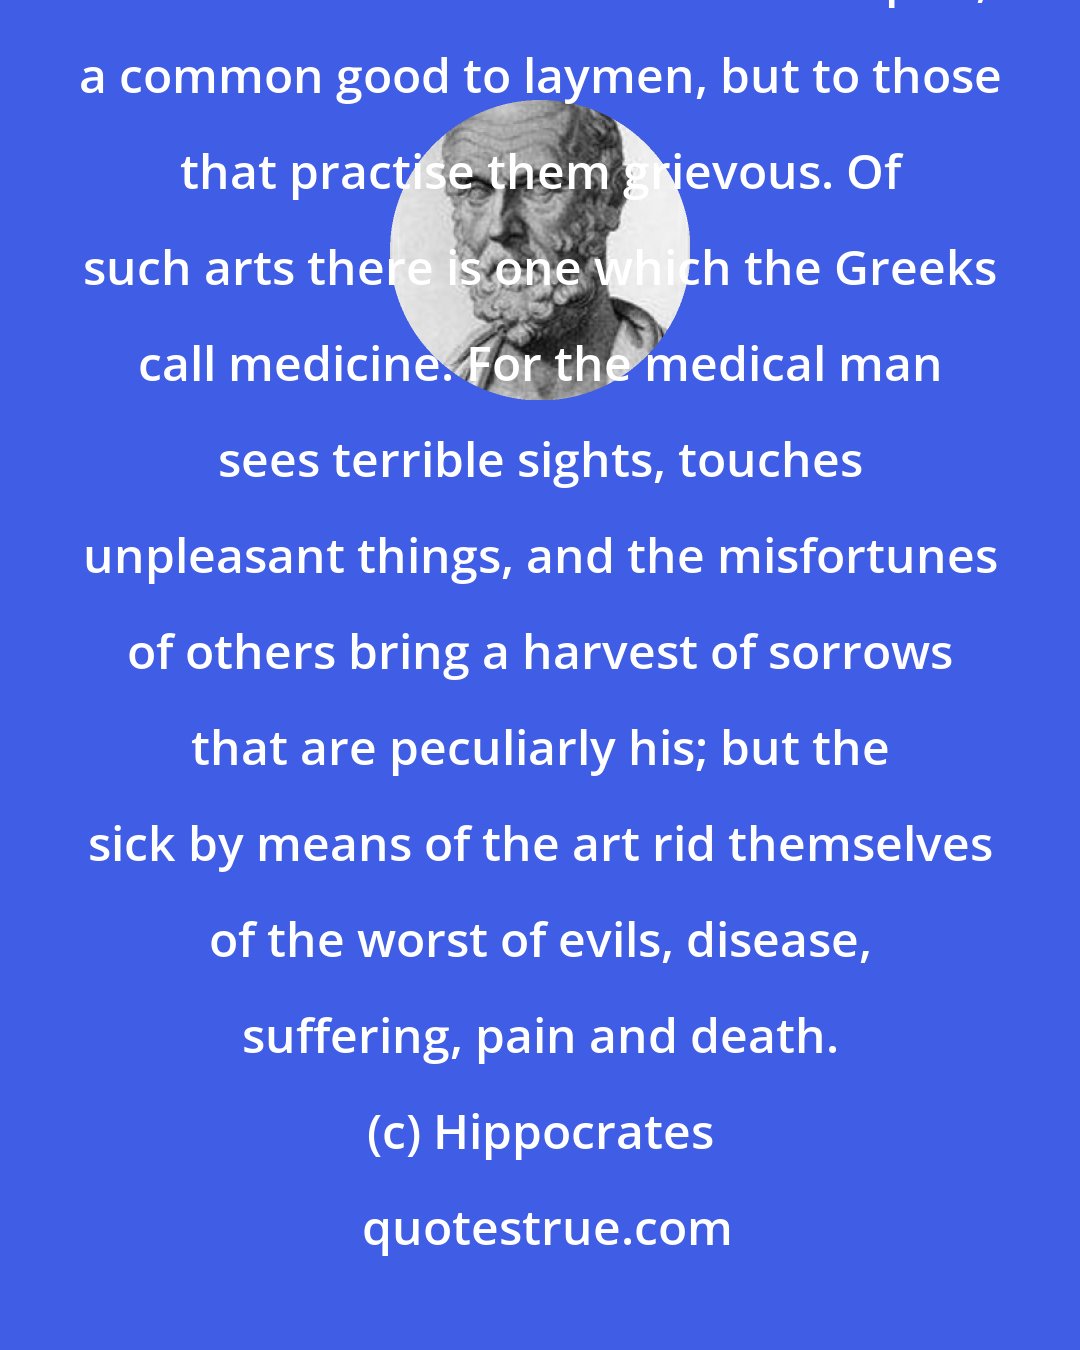 Hippocrates: There are some arts which to those that possess them are painful, but to those that use them are helpful, a common good to laymen, but to those that practise them grievous. Of such arts there is one which the Greeks call medicine. For the medical man sees terrible sights, touches unpleasant things, and the misfortunes of others bring a harvest of sorrows that are peculiarly his; but the sick by means of the art rid themselves of the worst of evils, disease, suffering, pain and death.